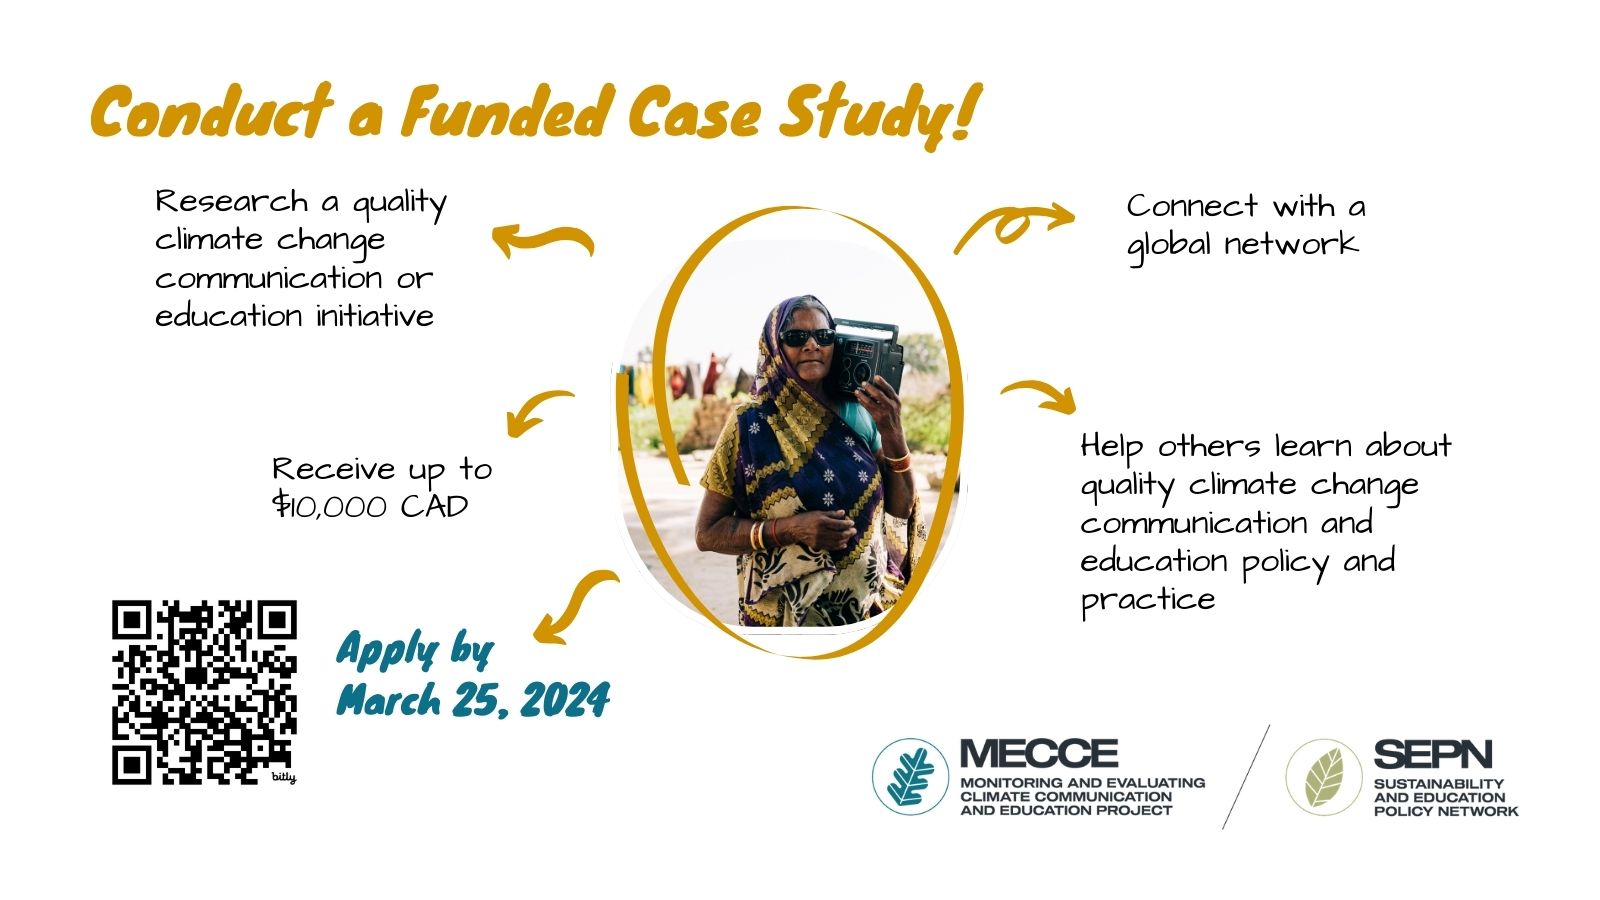 White background graphic with a photo of a person listening to a radio on their shoulder in the middle of the graphic. Text says, "Conduct a Funded Case Study! Research a quality climate change communication or education initiative. Connect with a global network. Help others learn about quality climate change communication and education policy and practice. Receive up to $10,000 CAD. Apply by March 25, 2024."